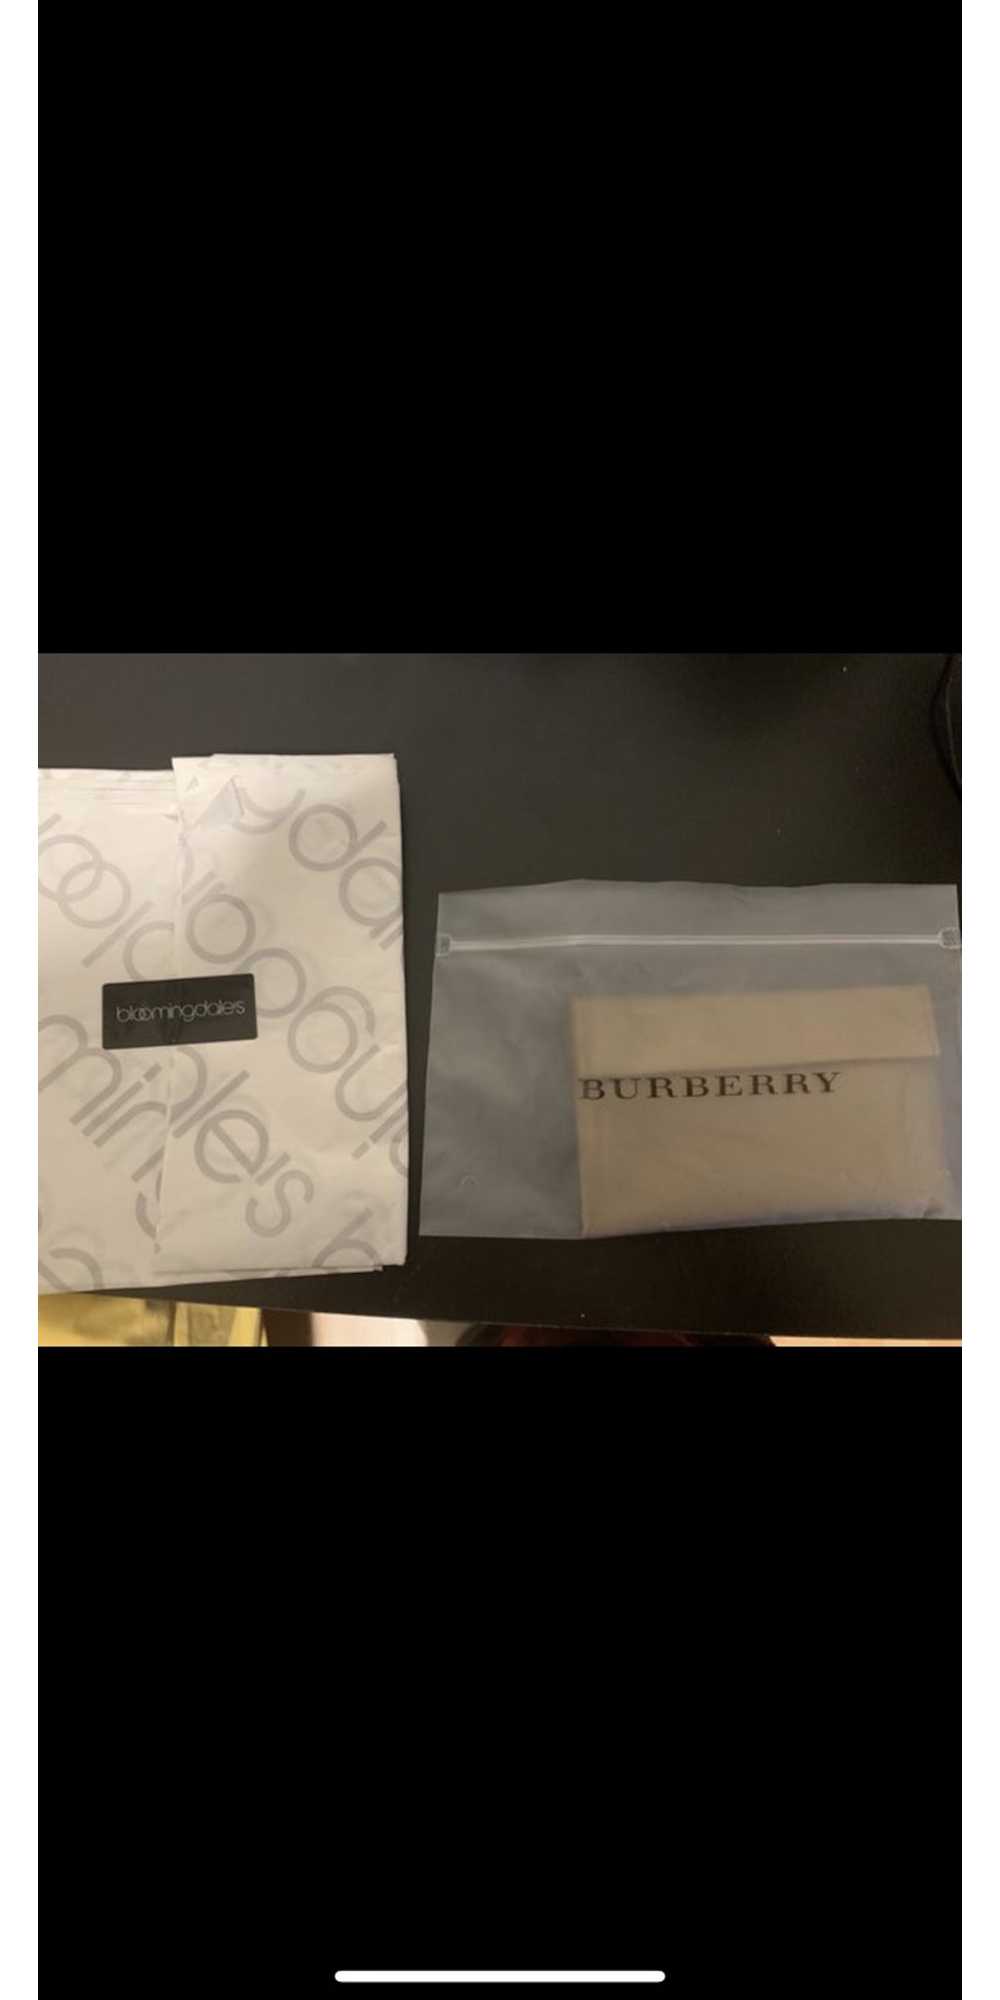 Burberry Burberry wallet - image 4